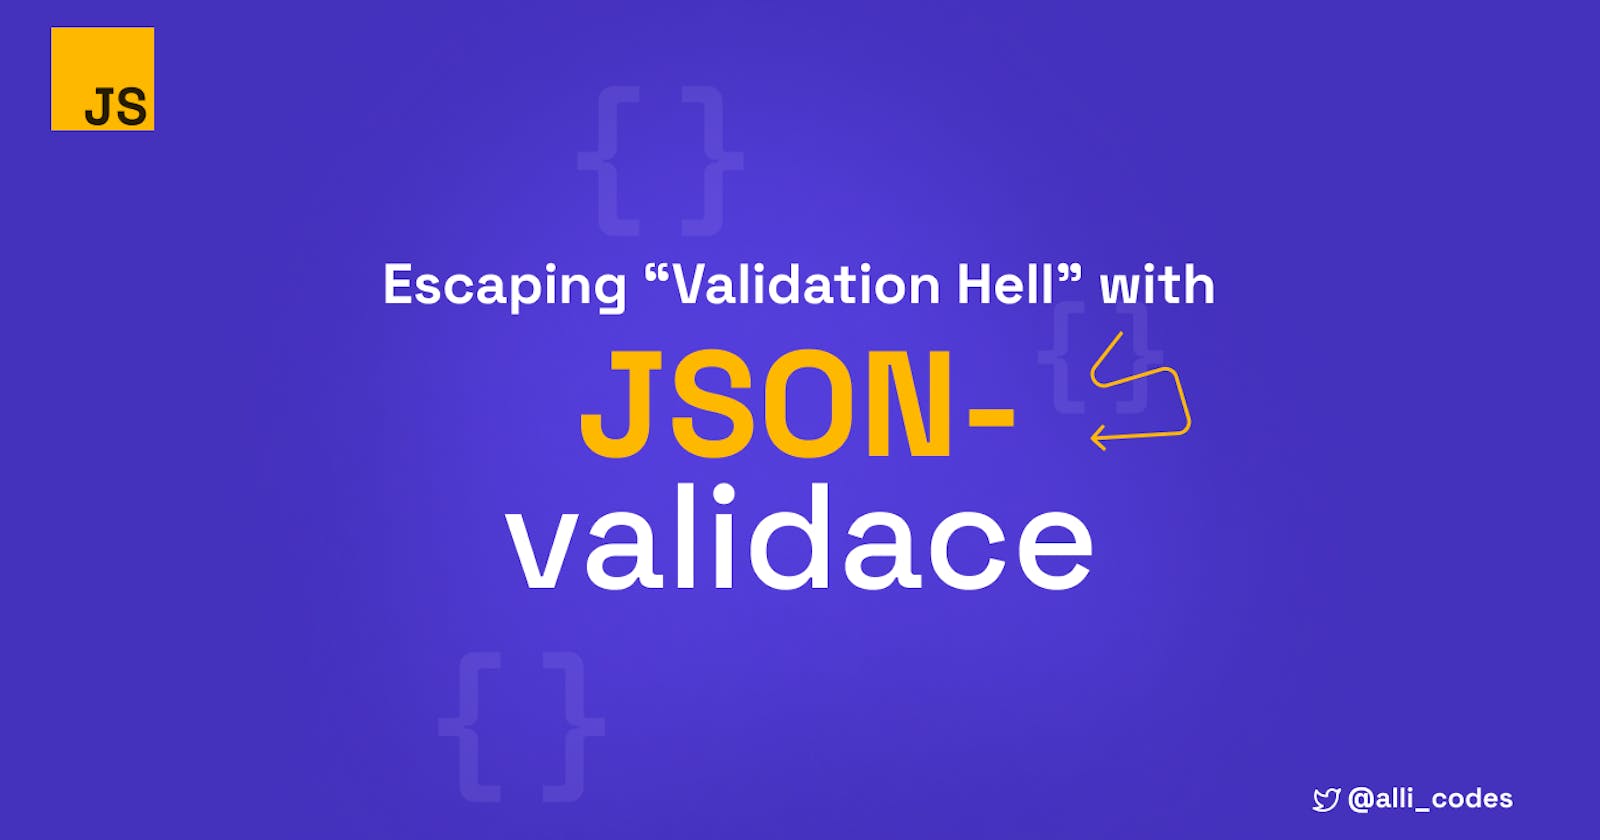 Escaping "Validation Hell" with JSON-Validace (E1).